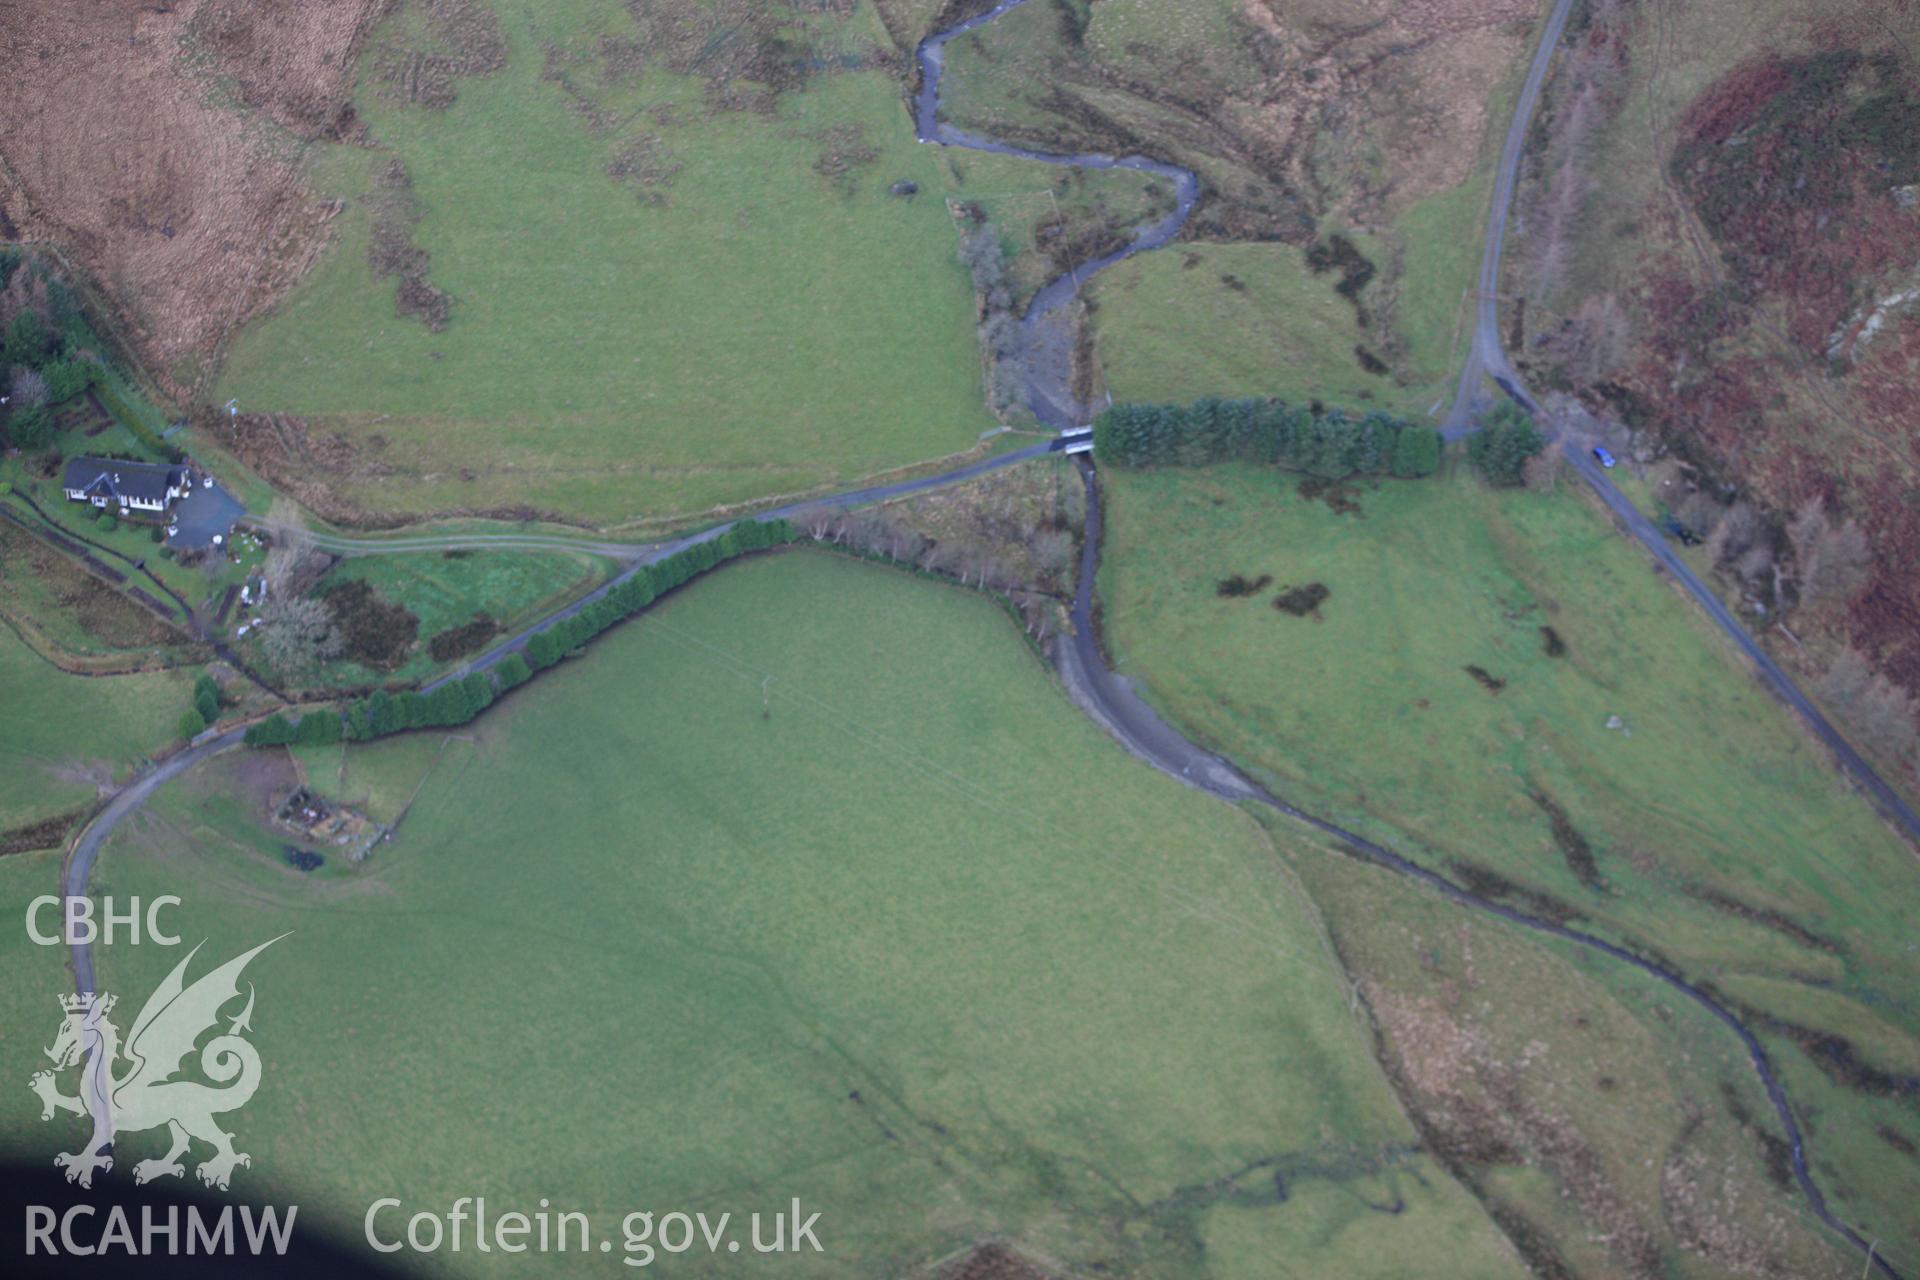 RCAHMW colour oblique aerial photograph of Cwm-y-Saeson Standing Stone. Taken on 10 December 2009 by Toby Driver